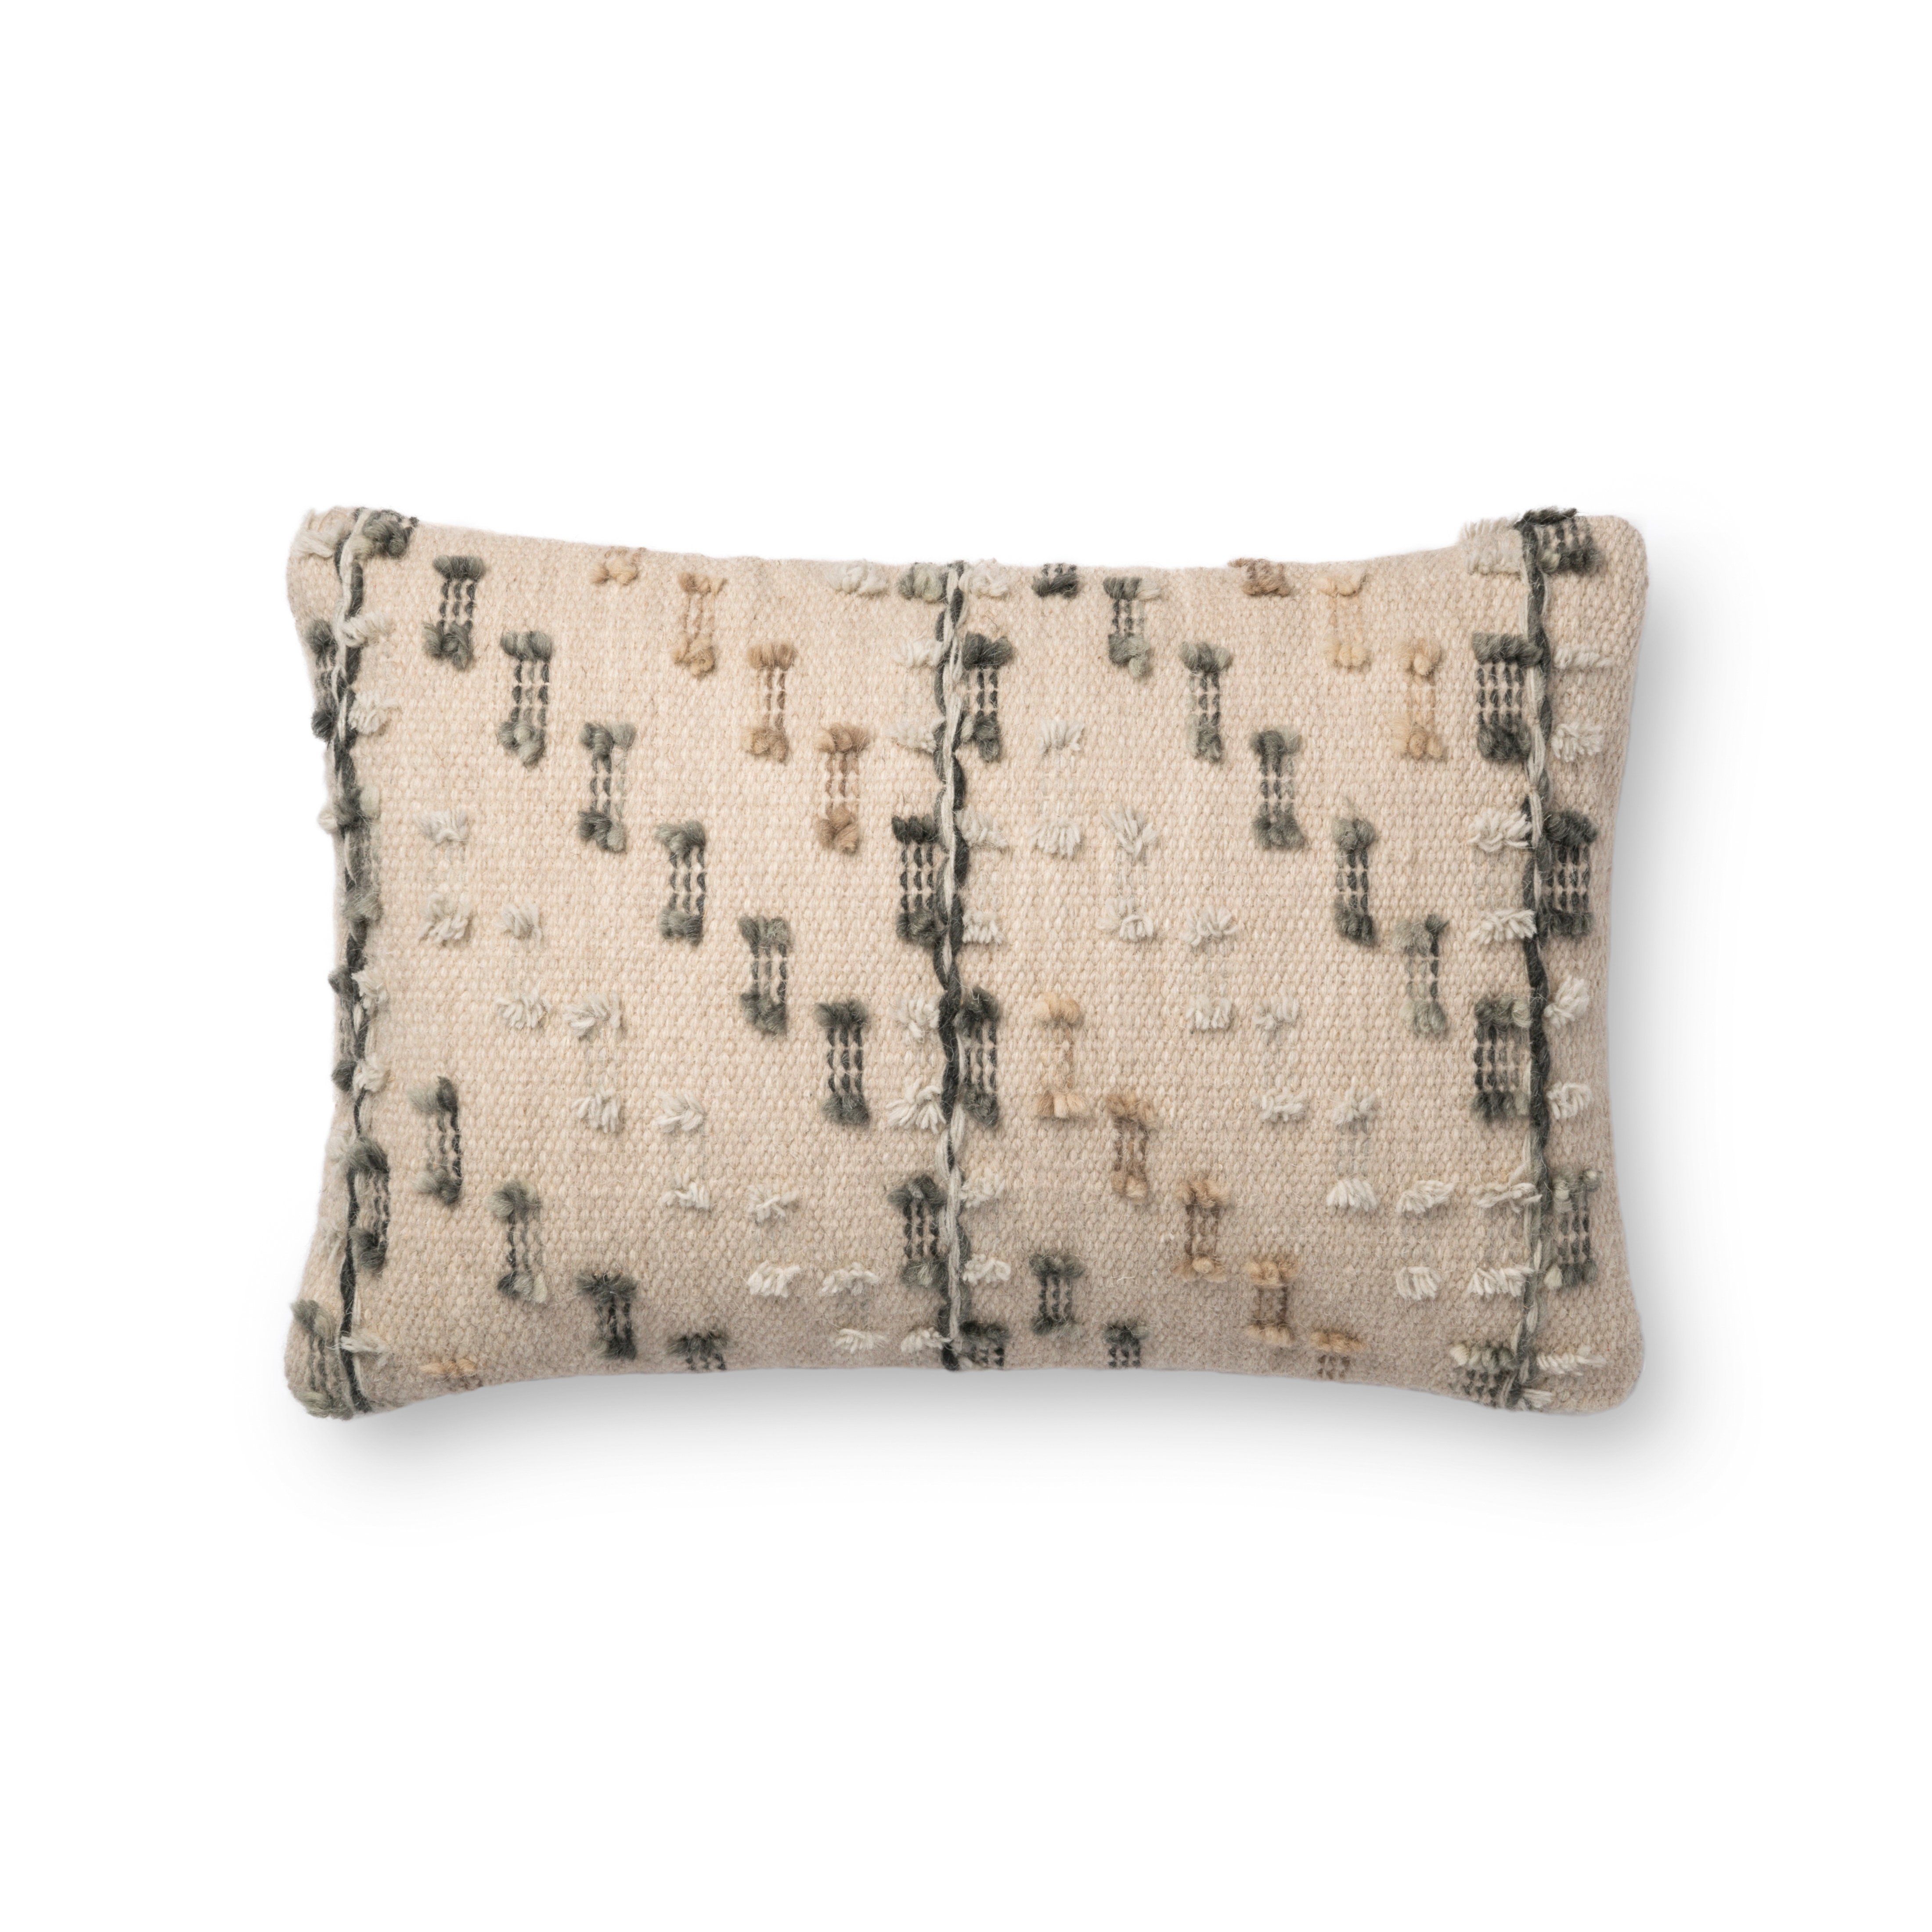 Magnolia Home by Joanna Gaines PILLOWS P1082 GREY / MULTI 12" x 27" Cover Only - Image 0